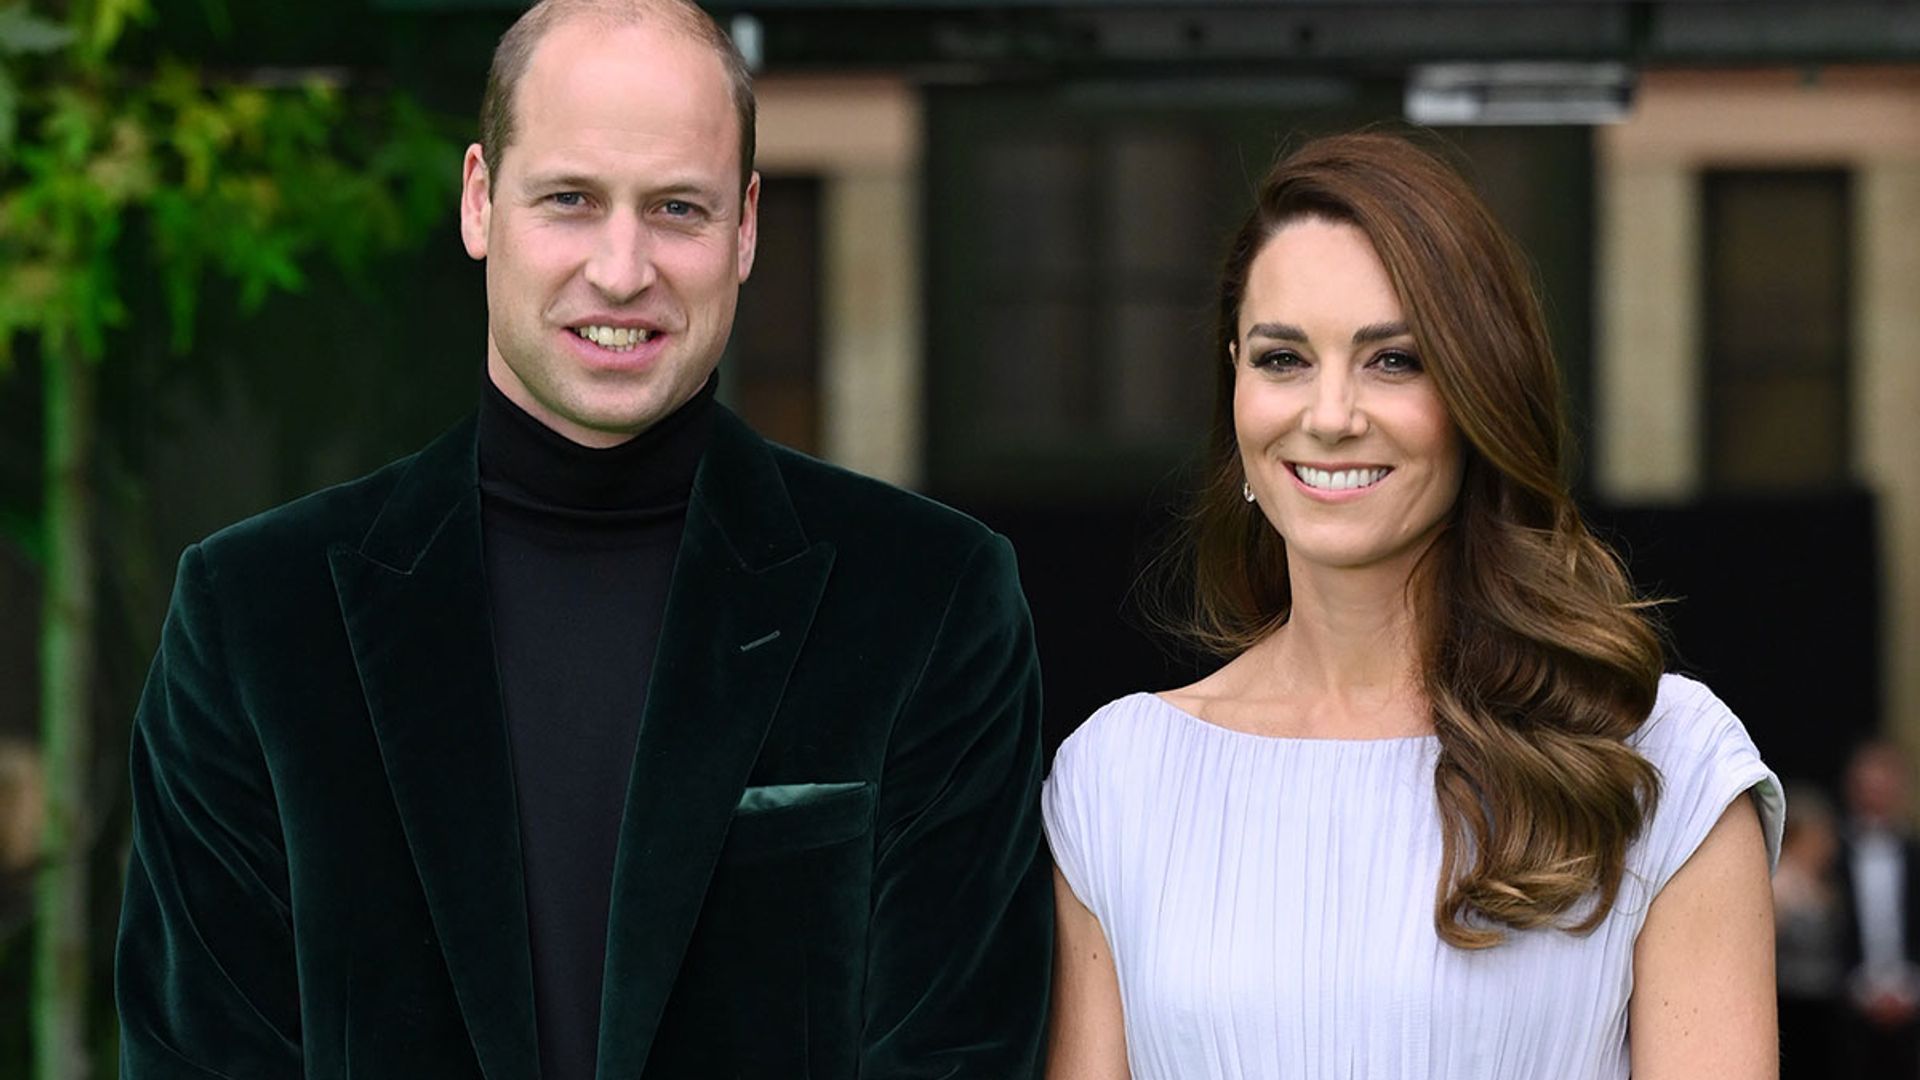 Prince William and Kate Middleton to hold special concert - report